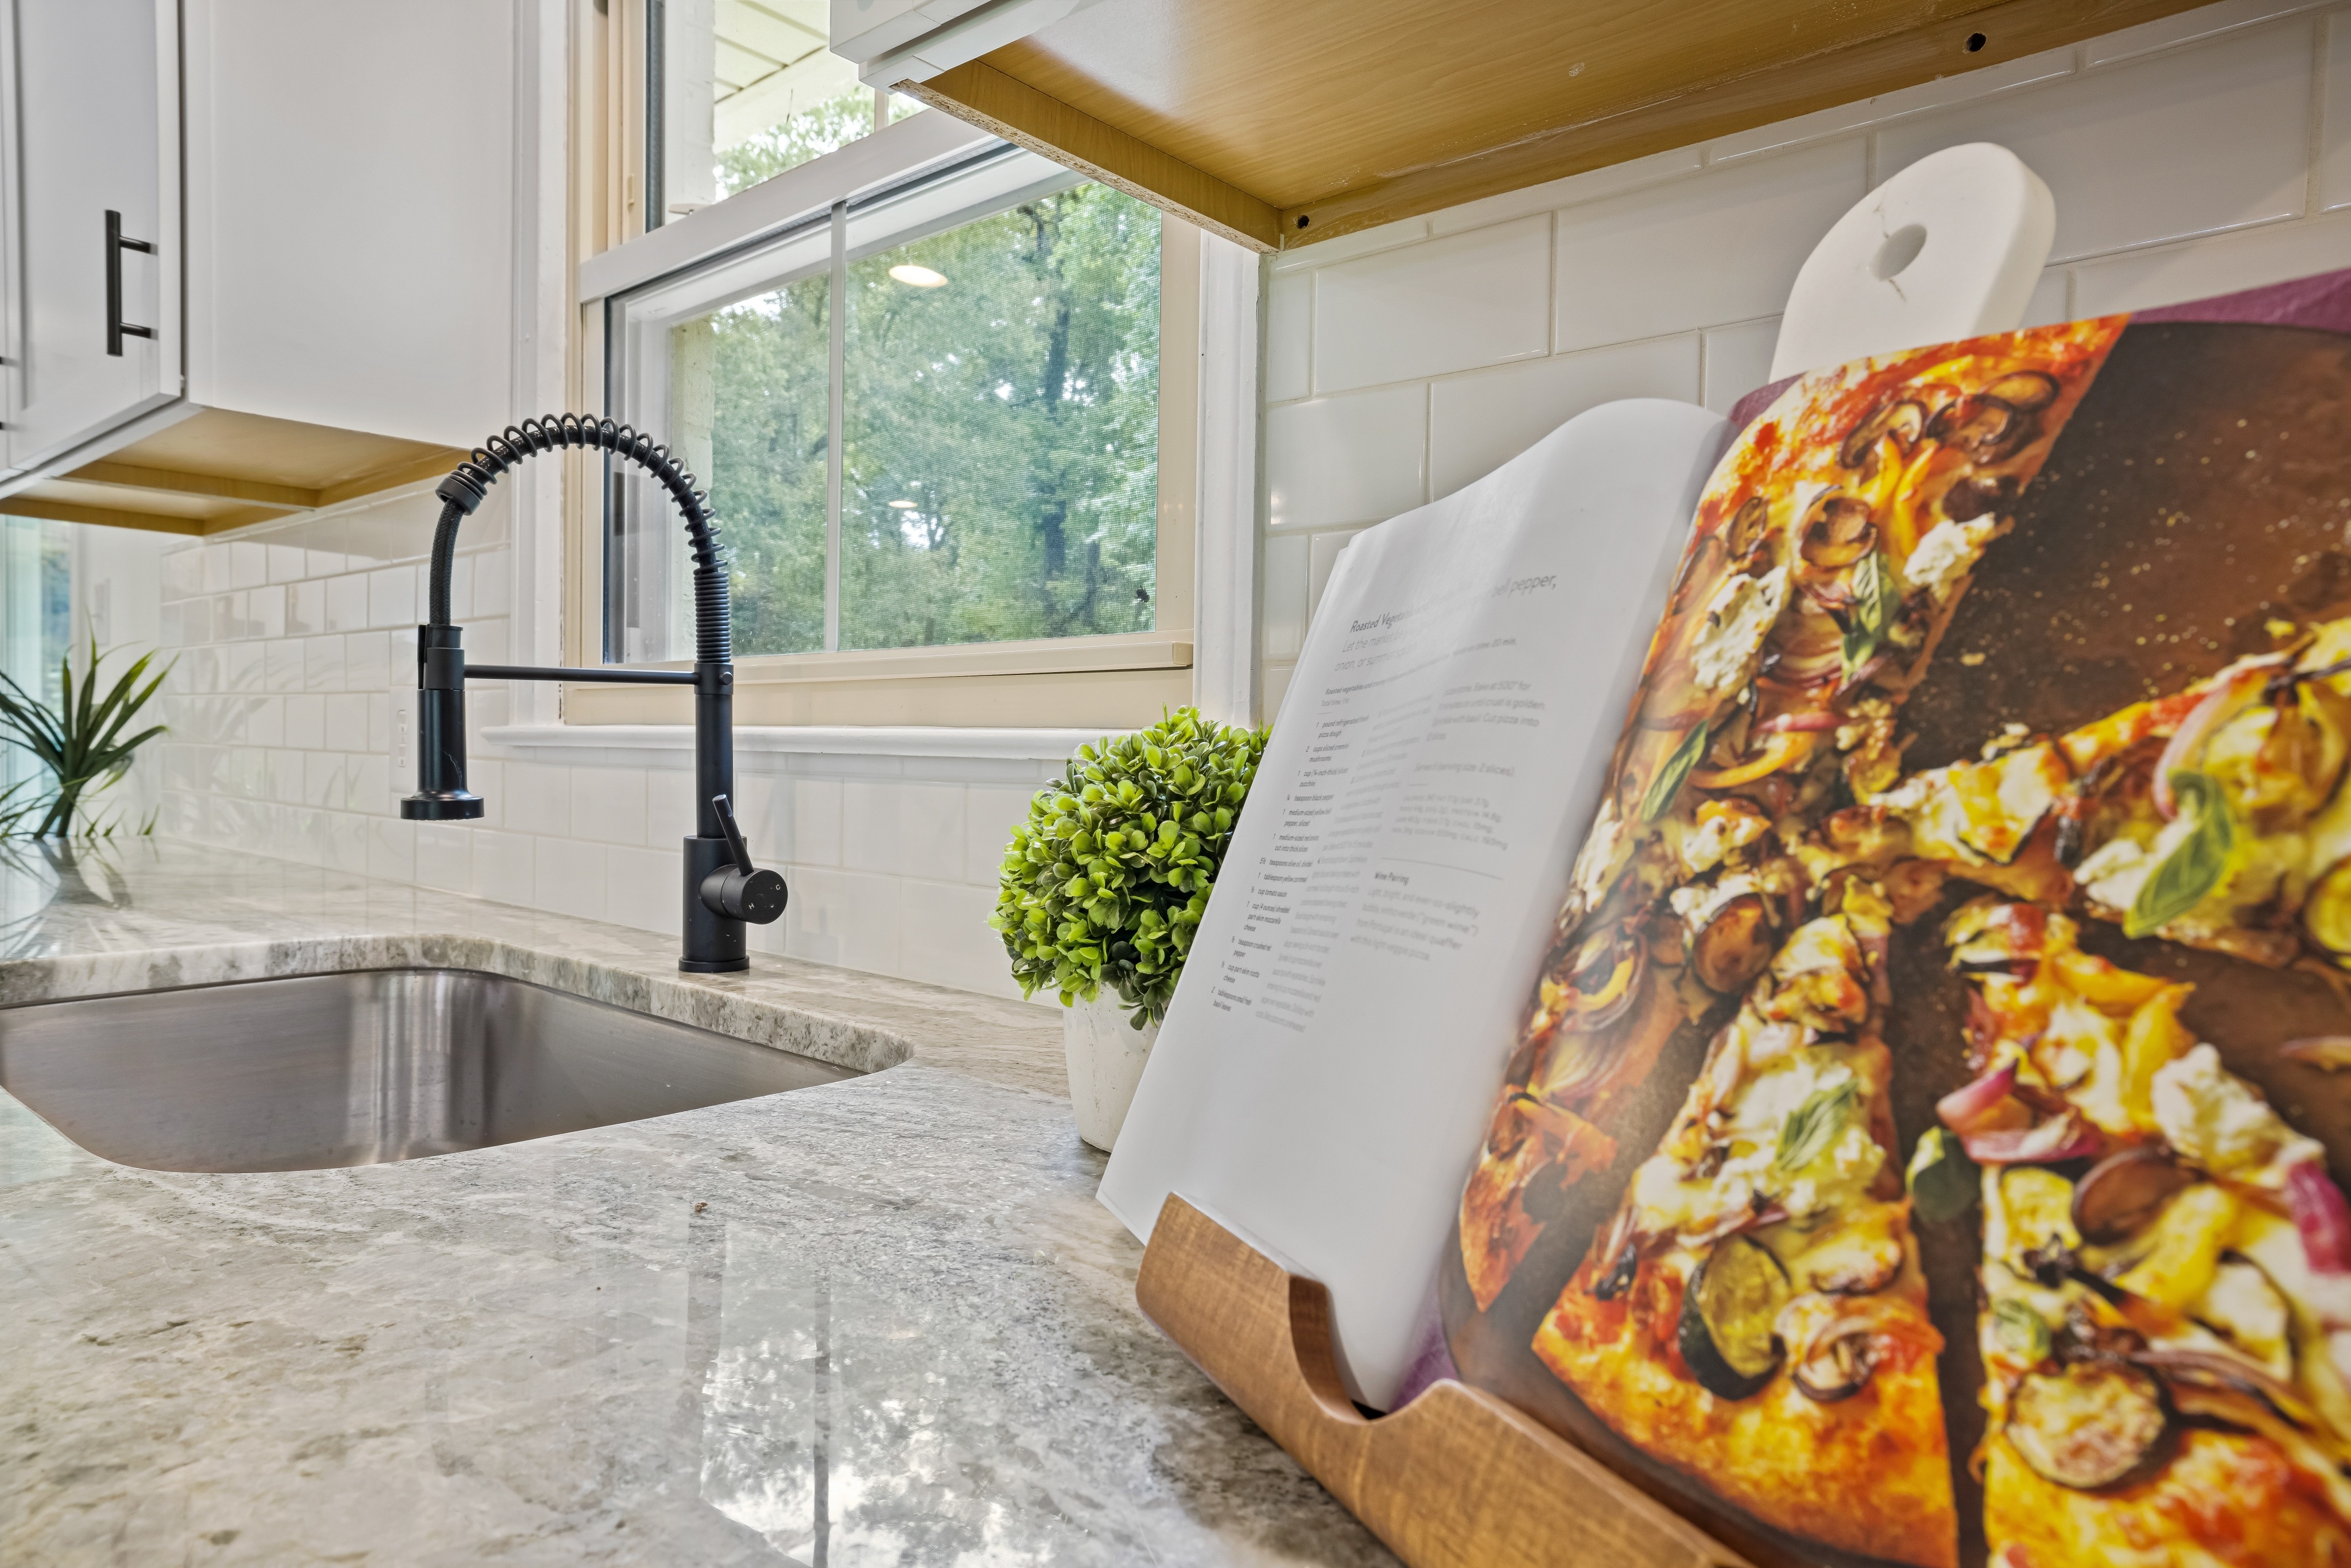 
How to Prevent Stains on Marble Countertops According to Your Denver Natural Stone Supplier